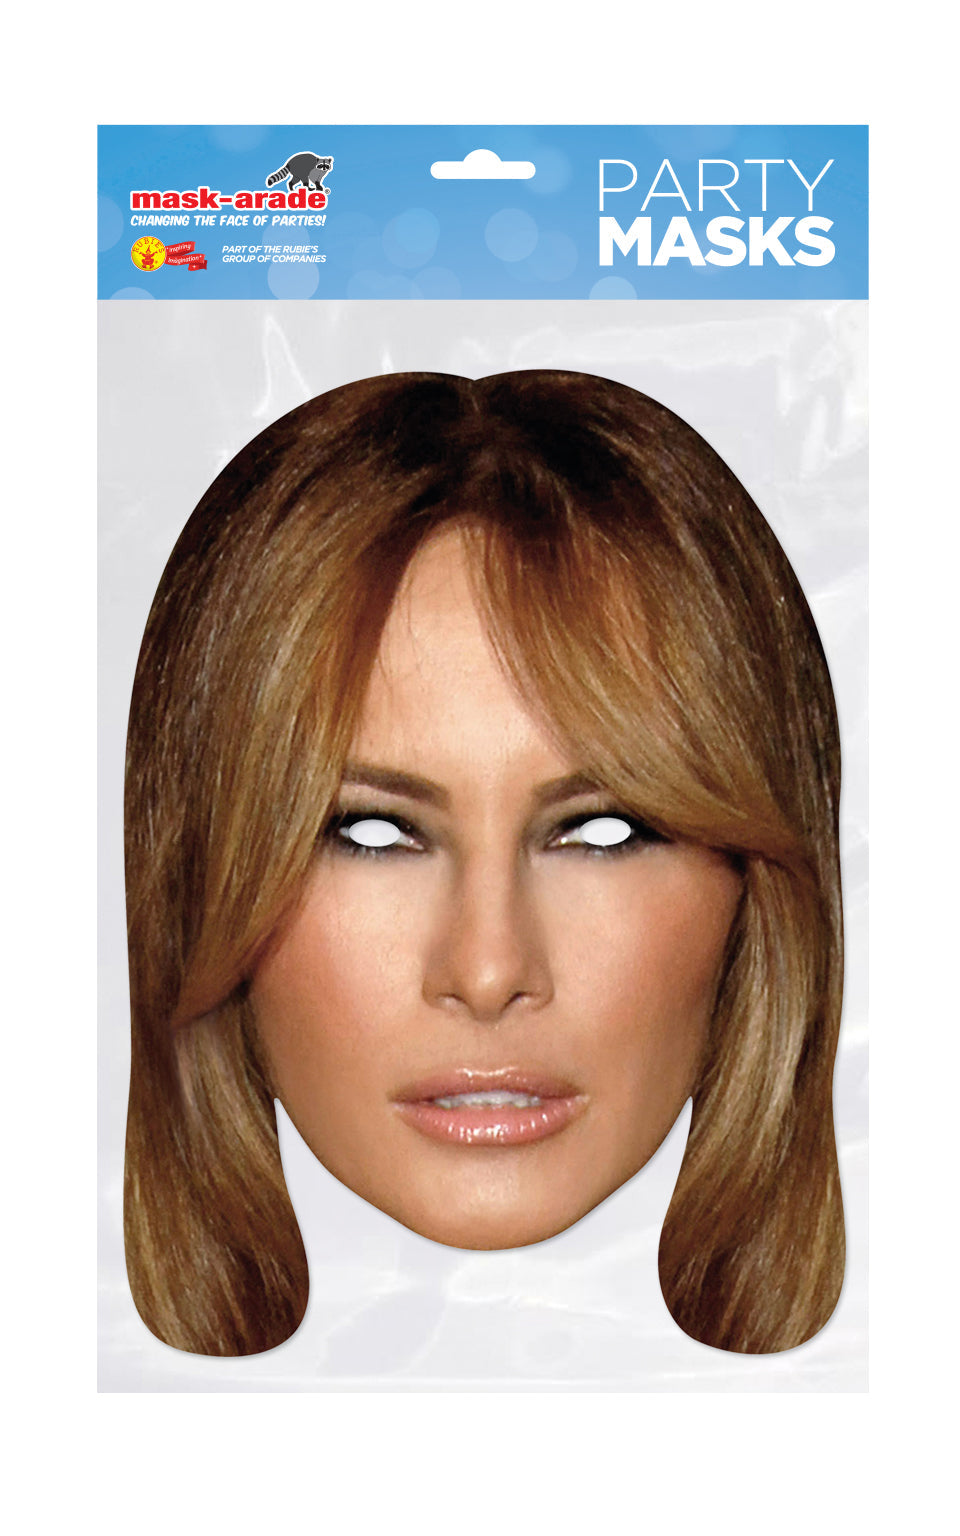 Melania Trump Celebrity Face Mask. Life size card face mask comes with eye holes and elastic fastening.